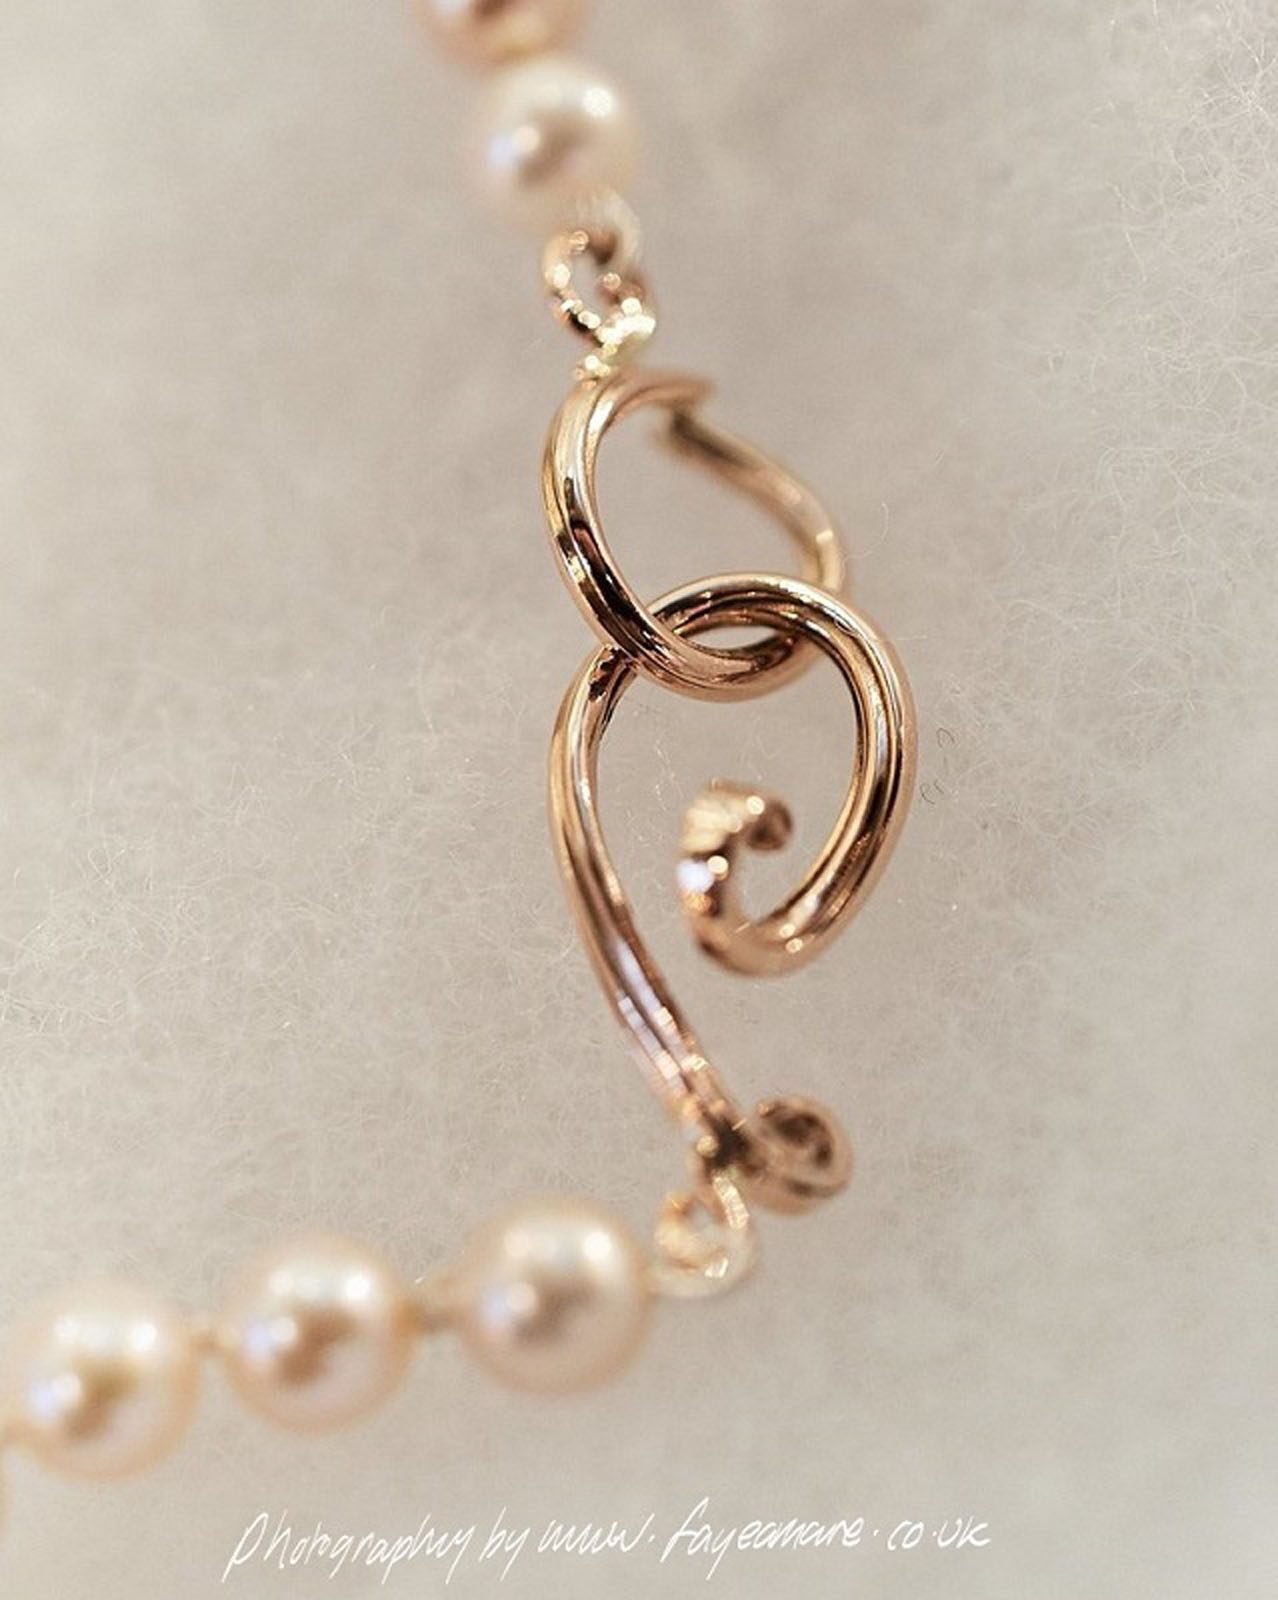 9ct Rose gold and Pearls Pendant